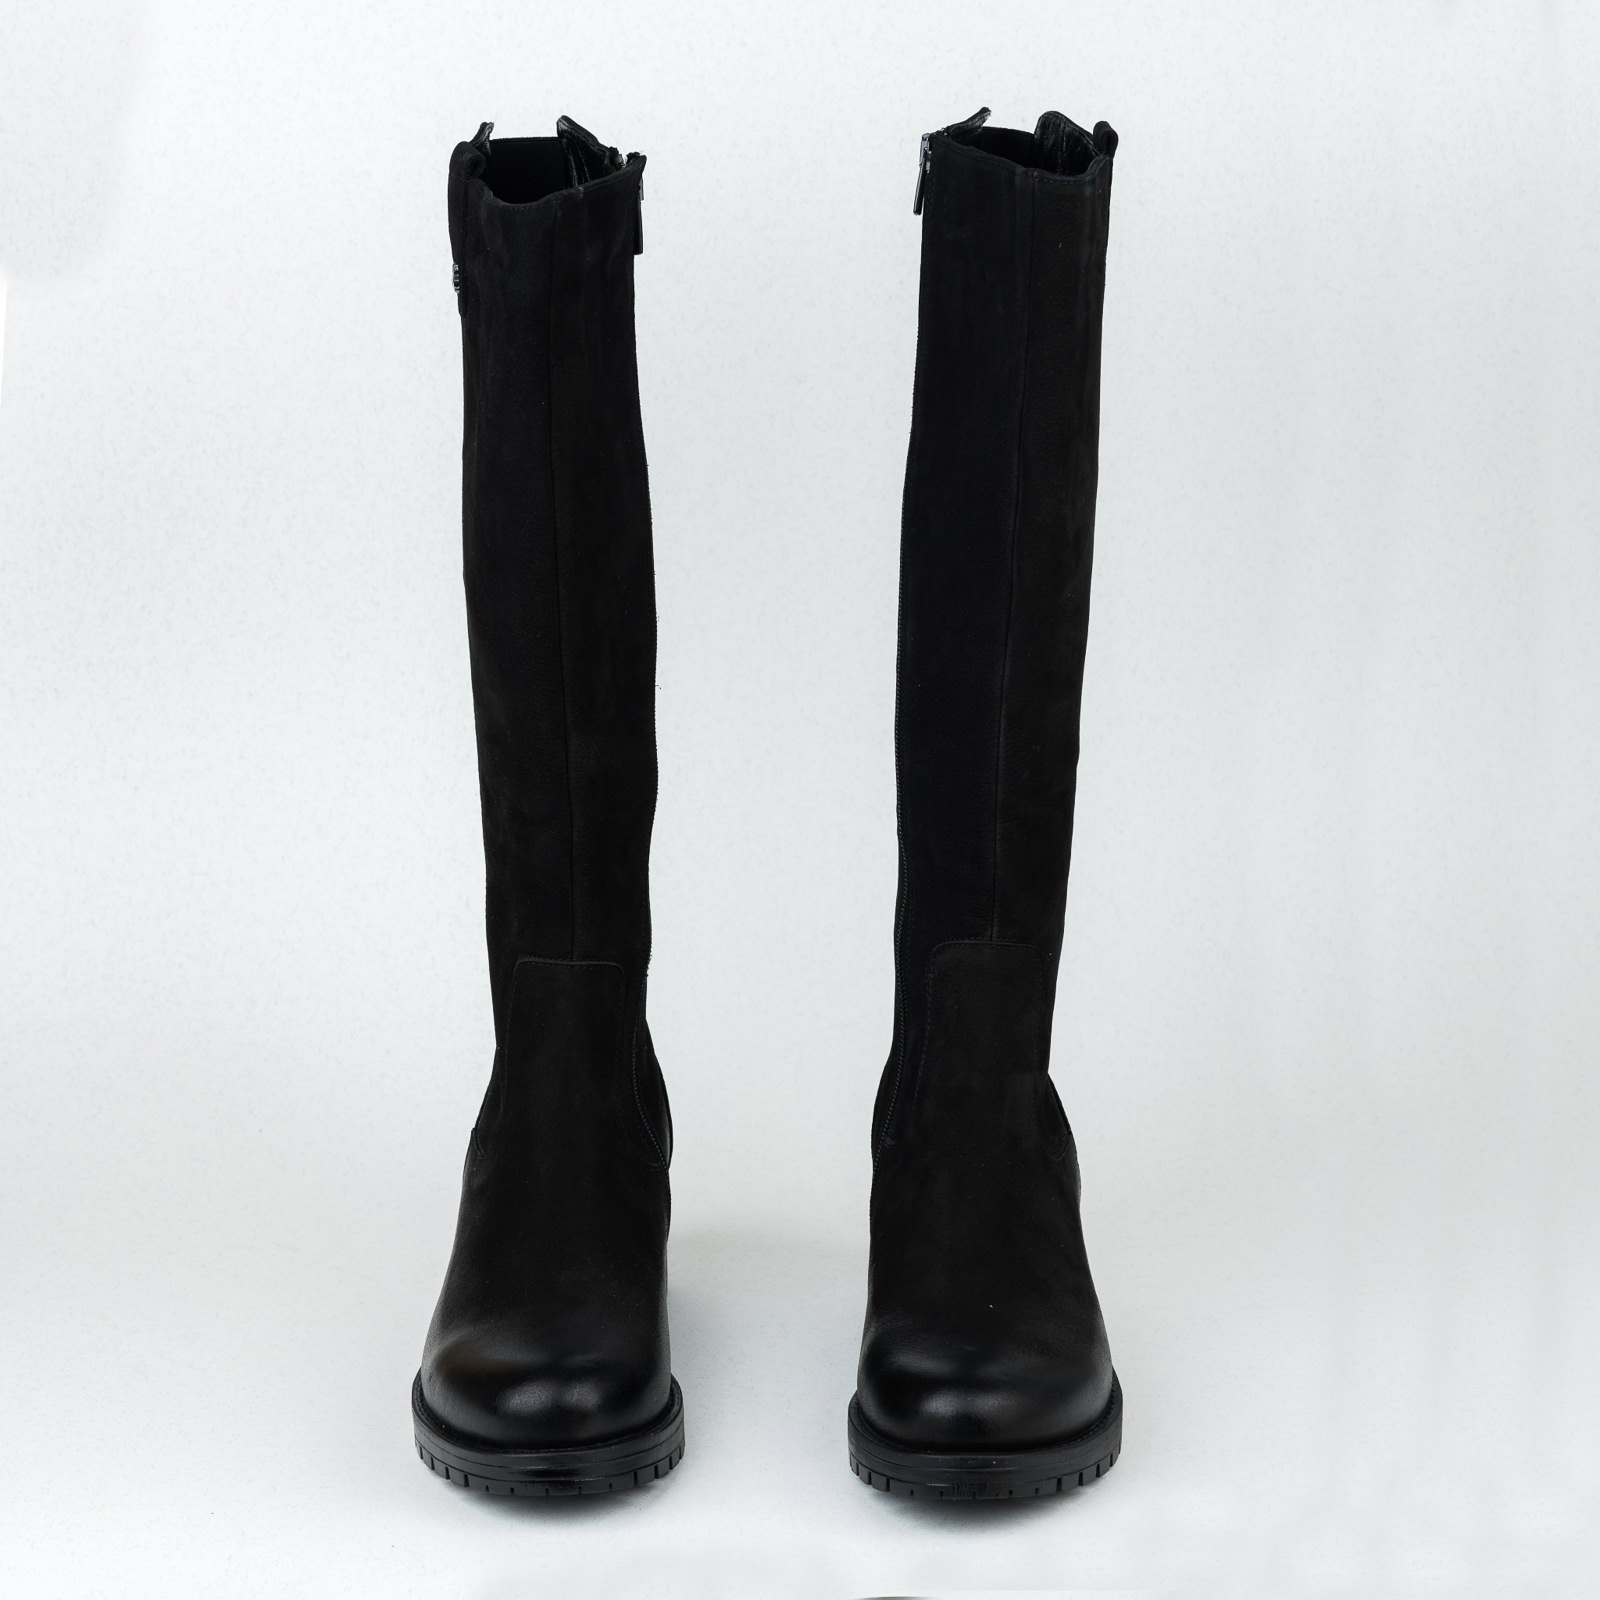 Leather boots B445 - BLACK